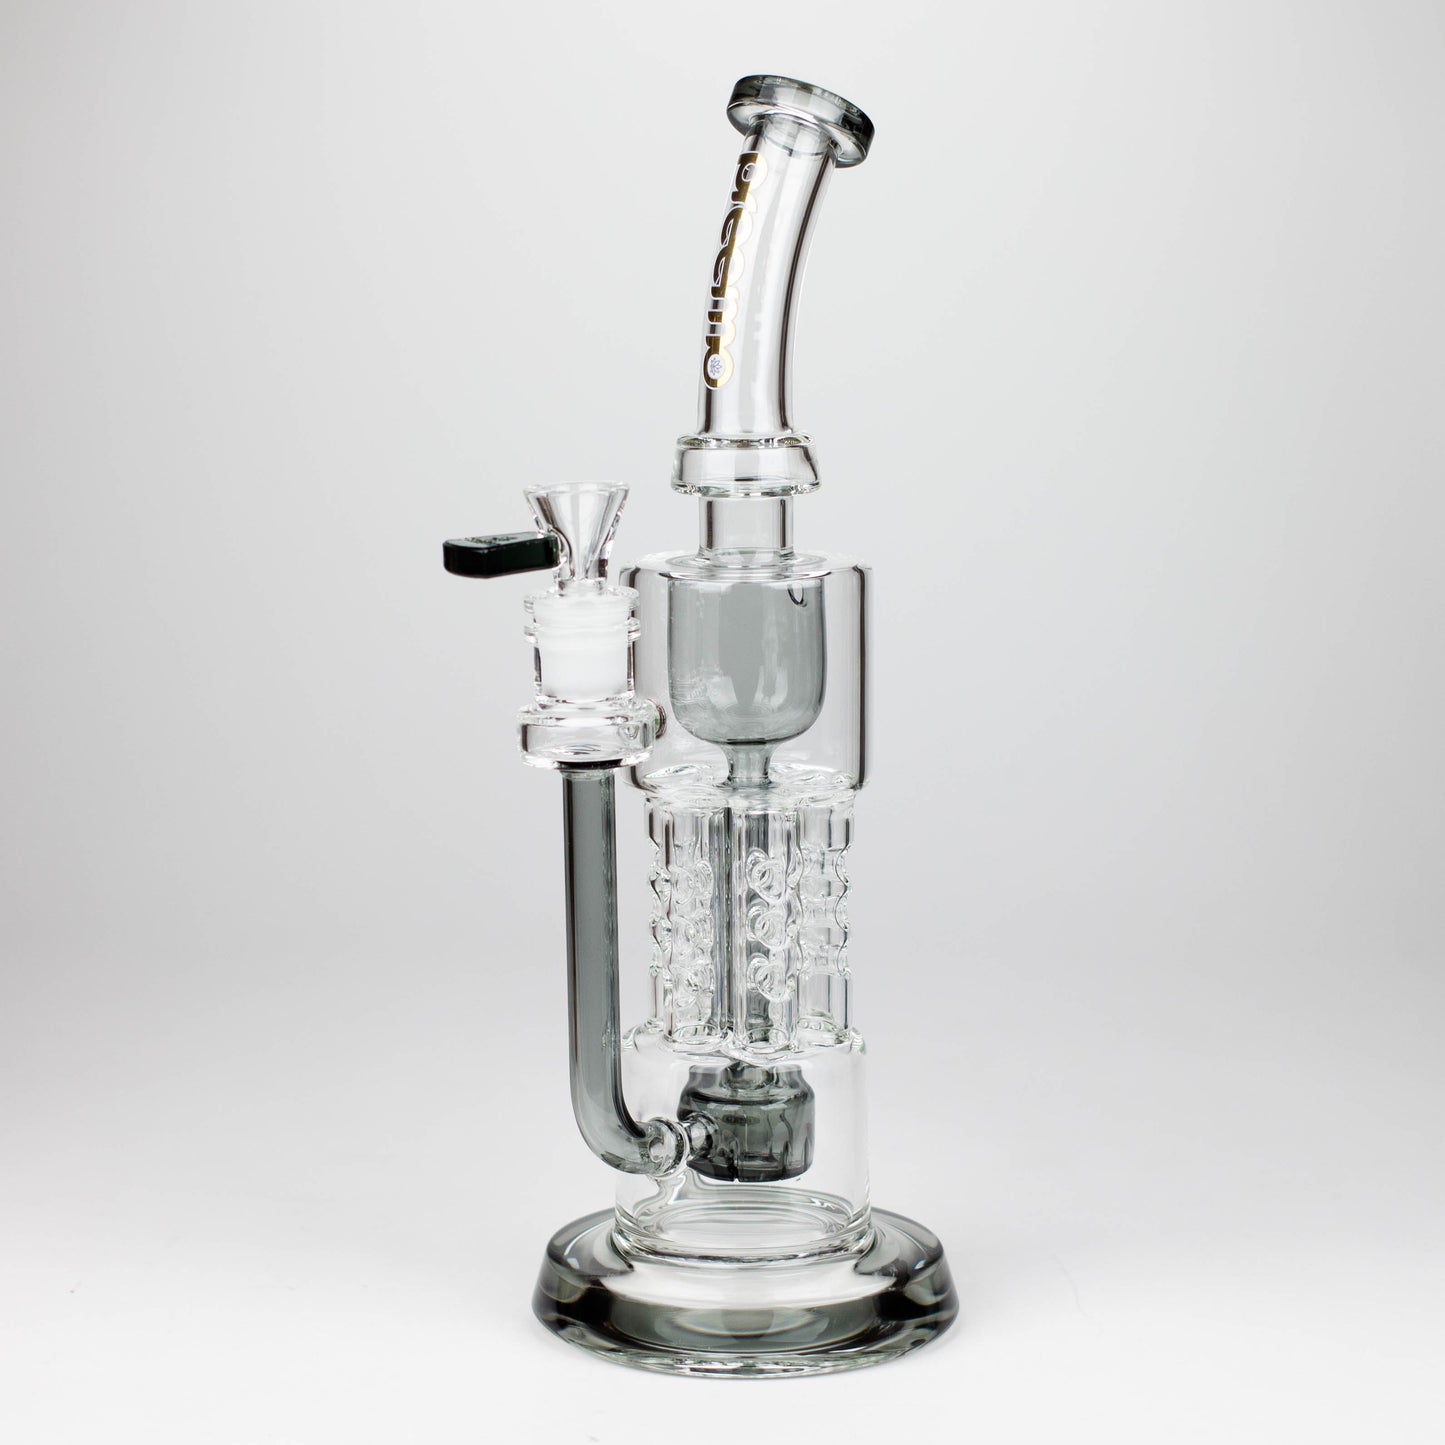 preemo | 12 inch Drum to Swiss Pillar Incycler [P090]_17